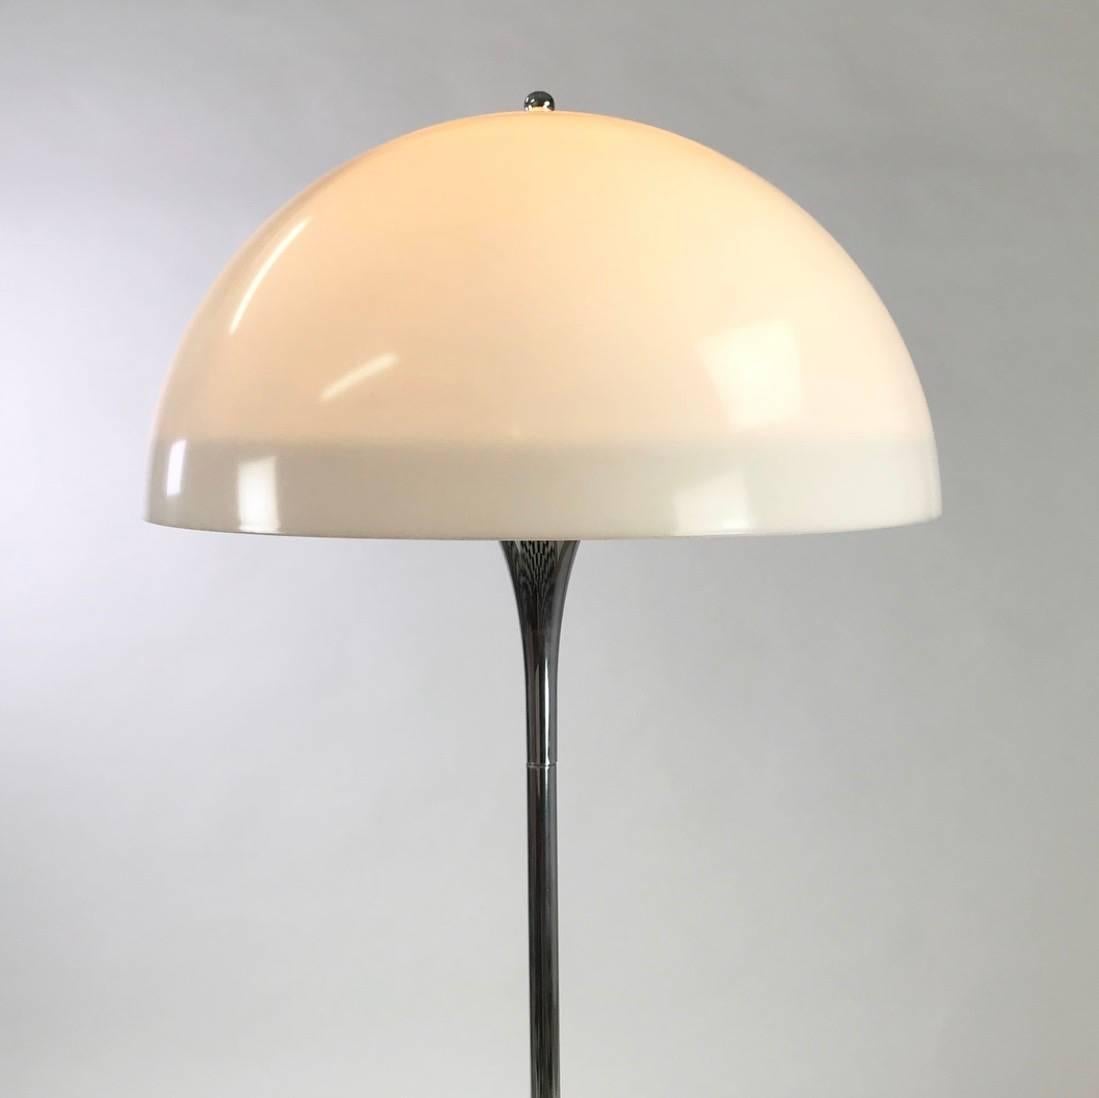 The Danish designer Verner Panton designed some of the most eye catching lights in the 1970s and this is one of the most famous designs: Classic and yet very rare piece of iconic Danish design - the Panthella floor lamp - by Verner Panton for Louis